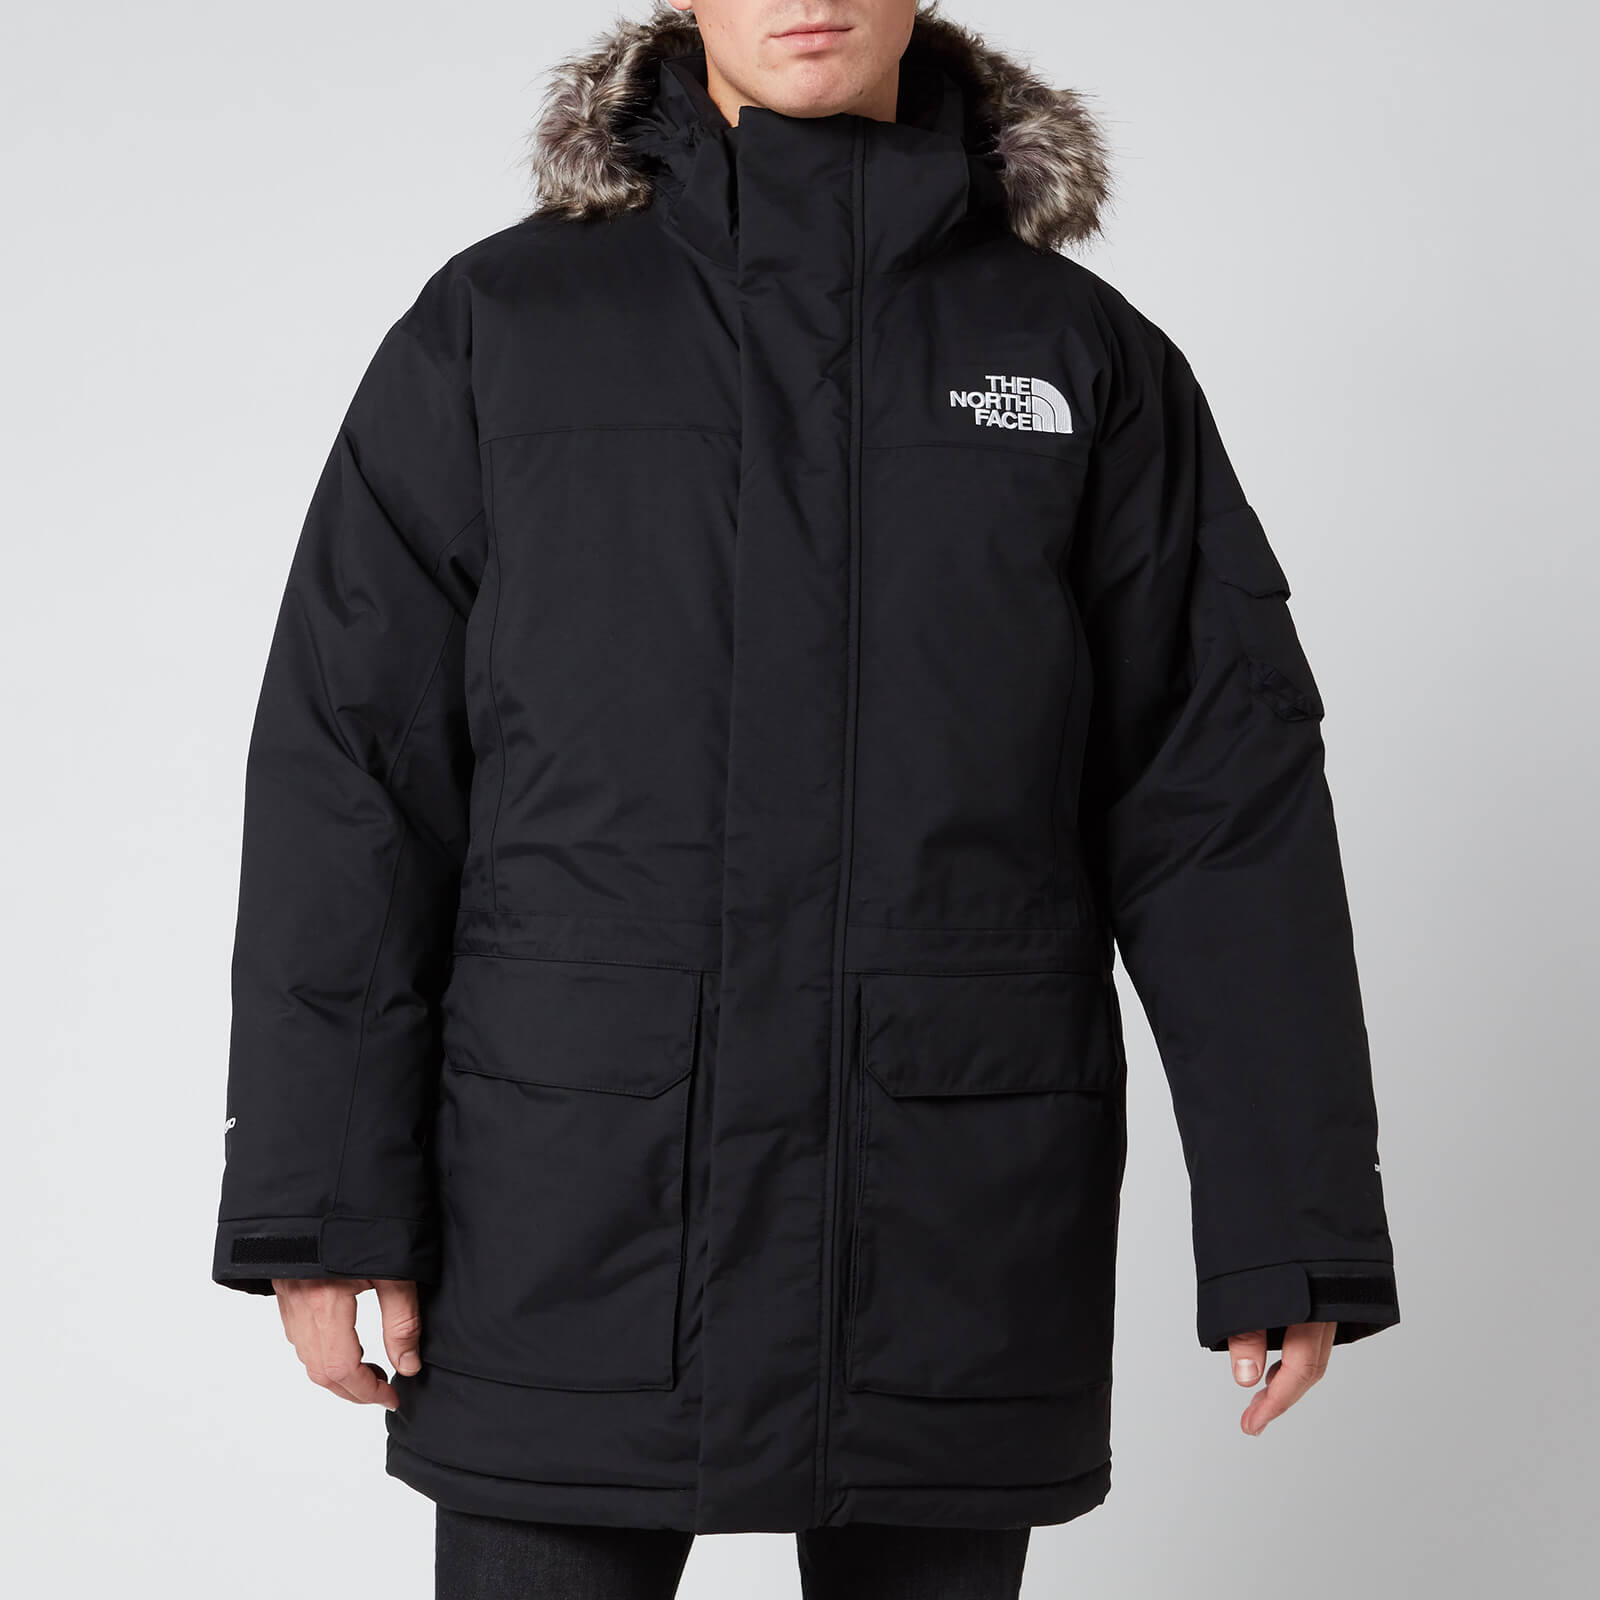 The North Face Men's Recycled Mcmurdo Jacket - TNF Black - XL